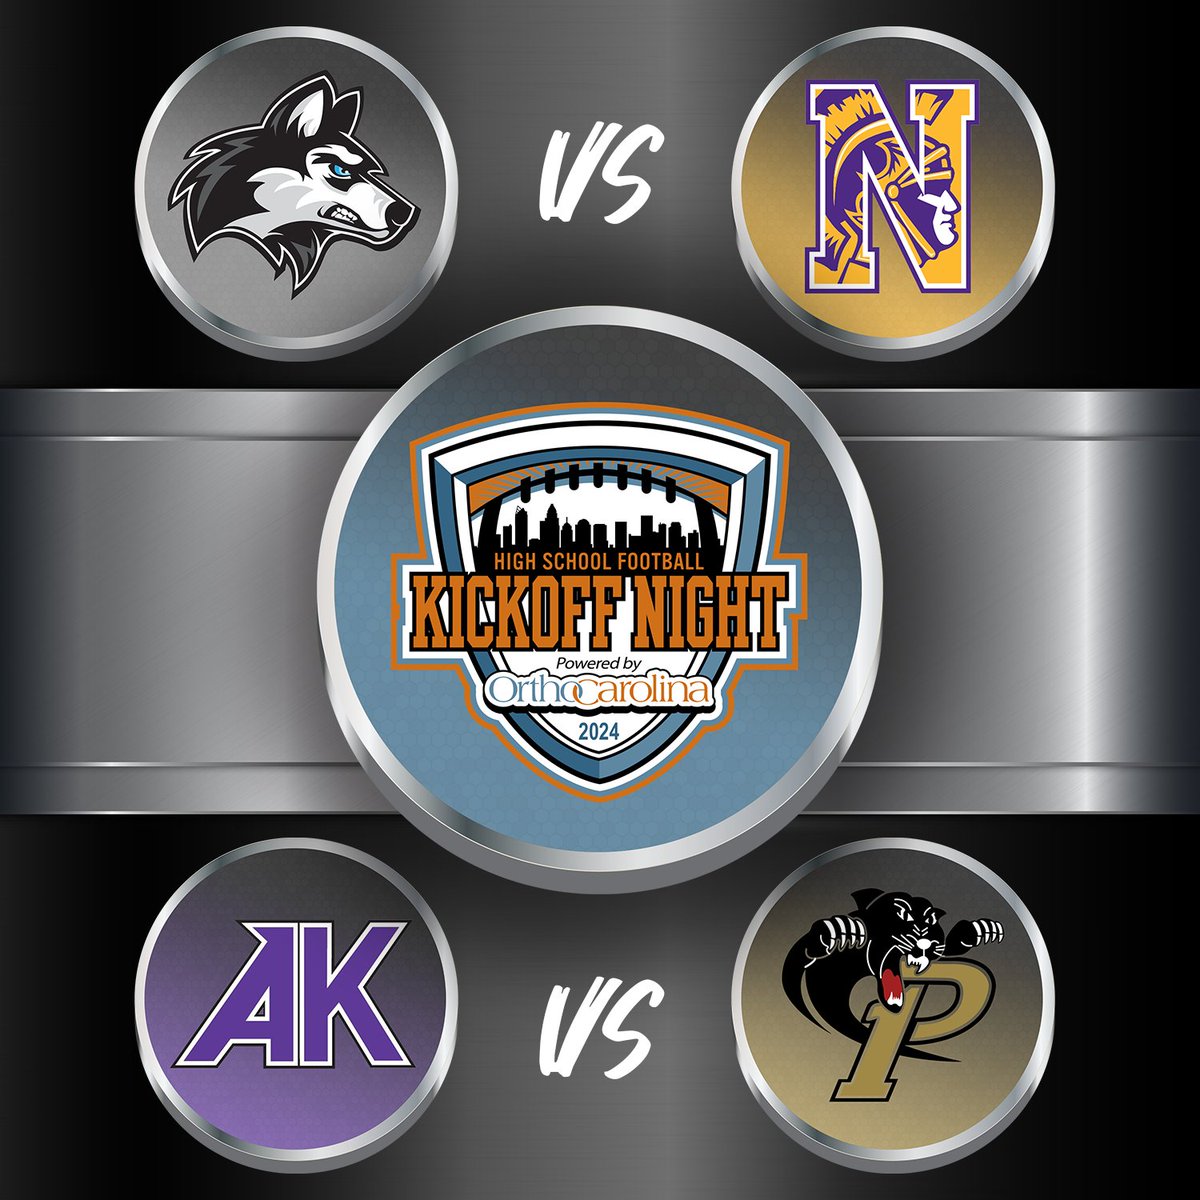 It is official 🏈 we are excited to announce the 11th annual Charlotte Kickoff Night powered by @OrthoCarolina match ups! 📅August 23 Game 1⃣ @HoughFB vs @NHSTrojansFB Game 2⃣ @Prov_Football vs @AKHS_Football ⏰5:15 PM / 8:00 PM 📍Memorial Stadium